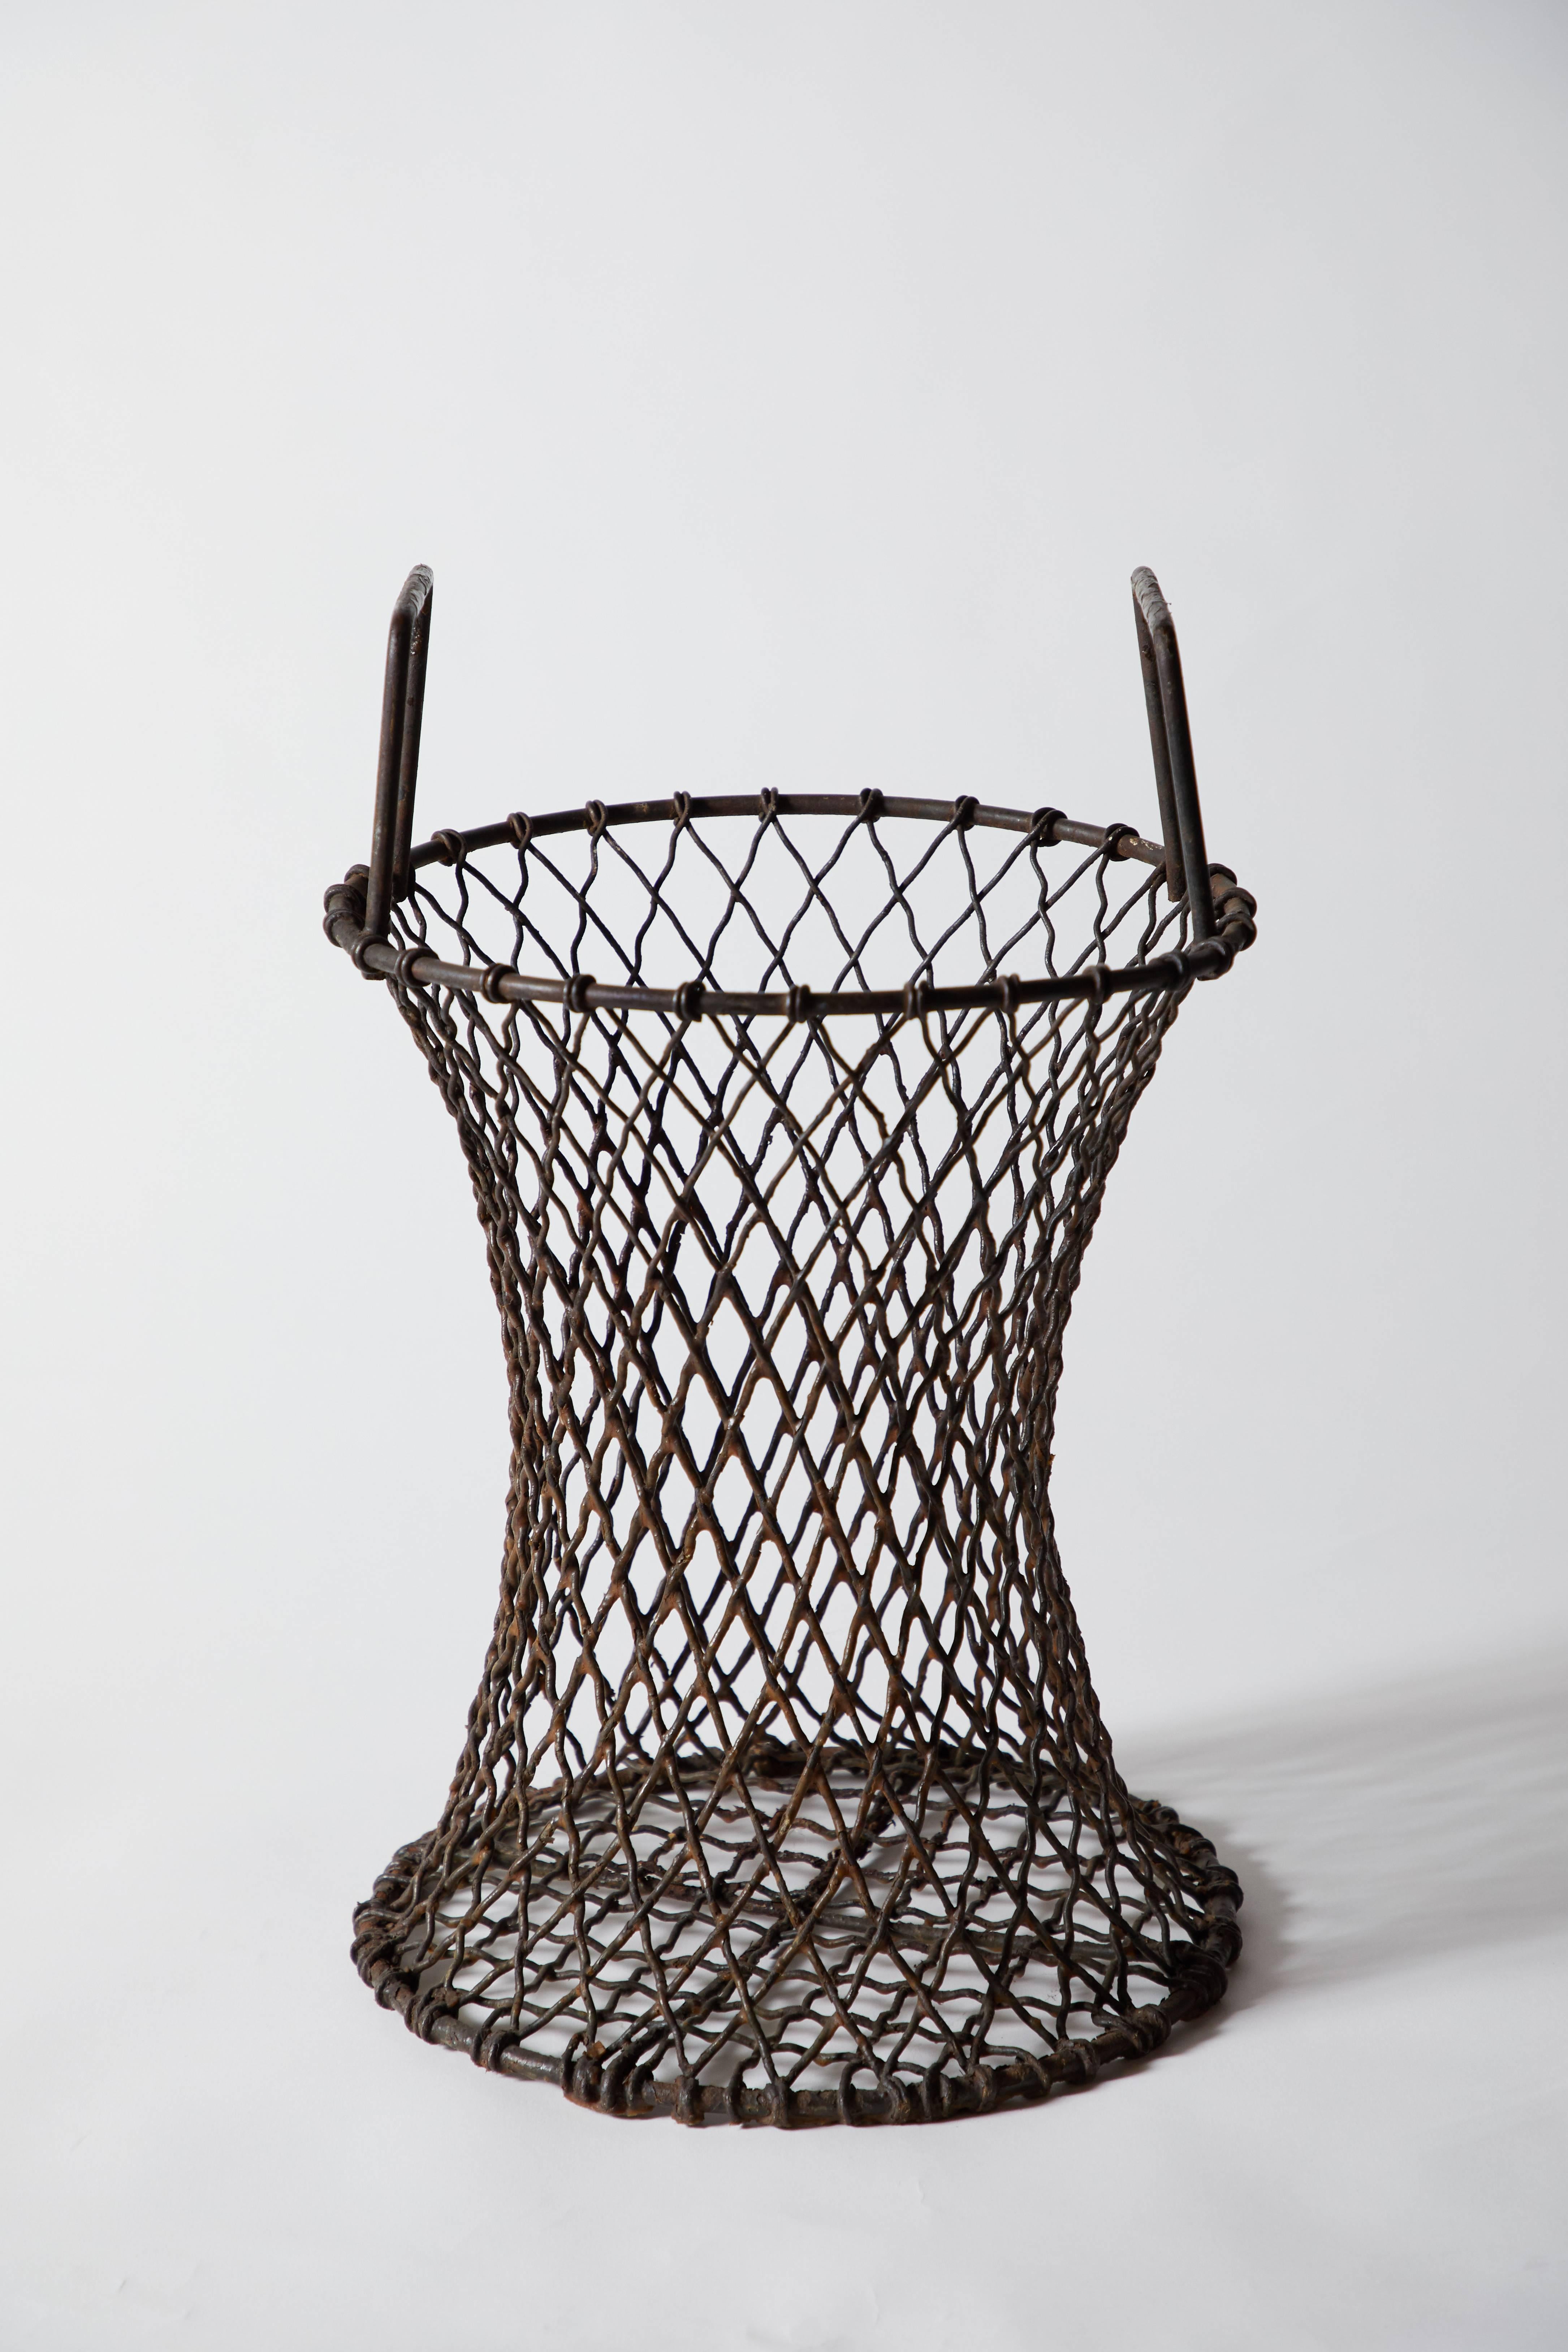 Early 20th century sculptural iron basket/umbrella stand with handles. Made in USA, circa 1900s.